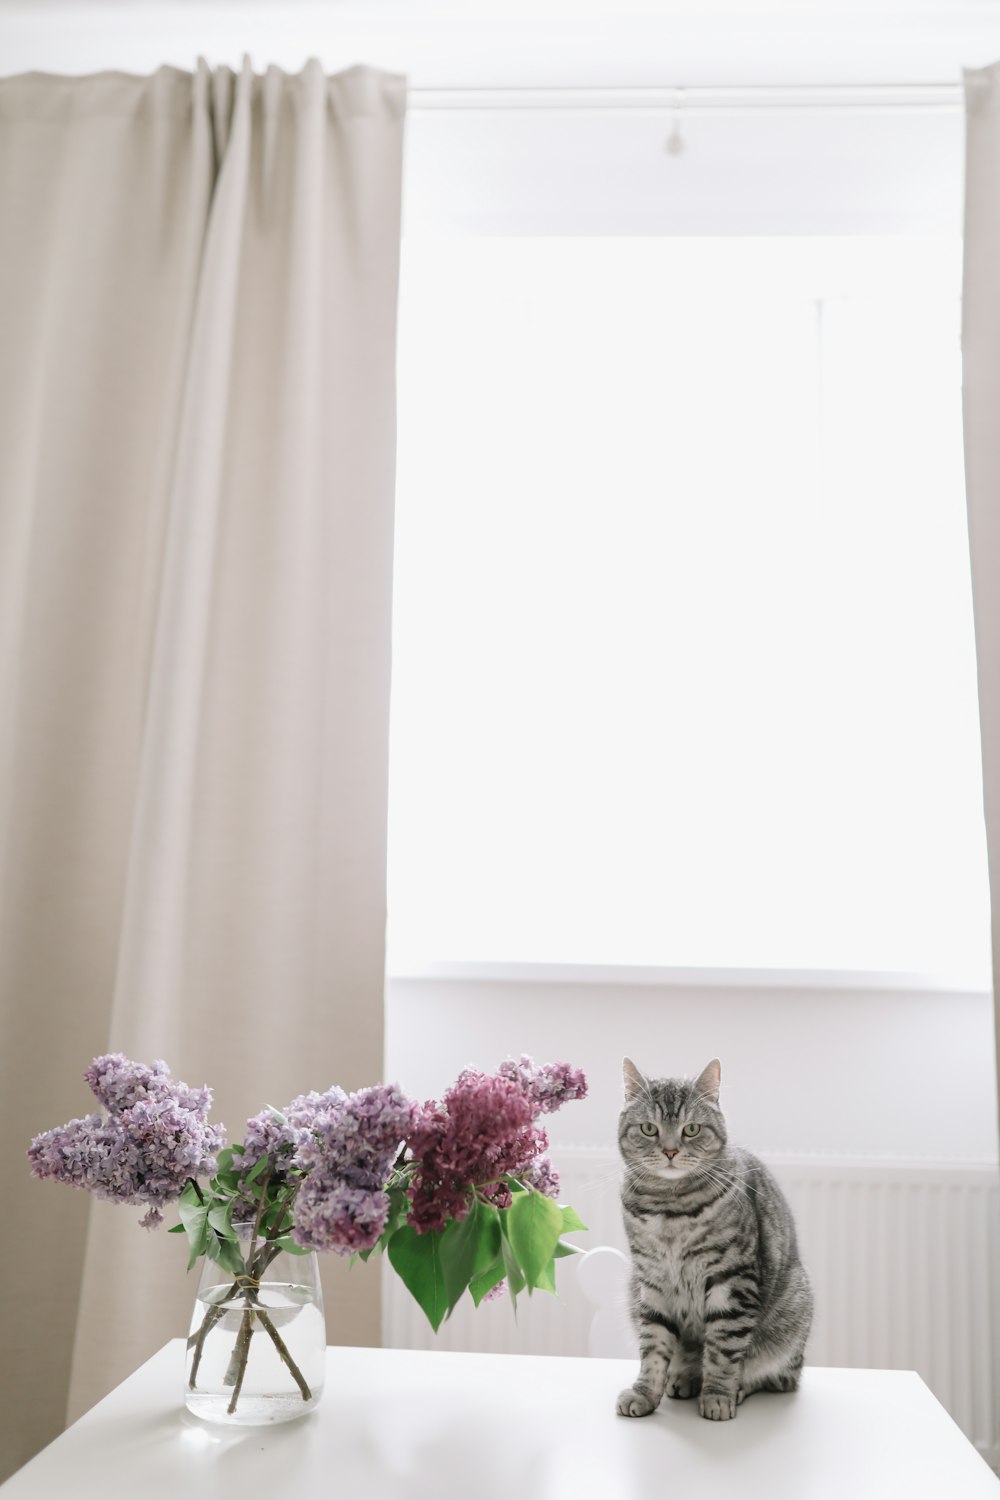 a cat sitting next to a vase of flowers